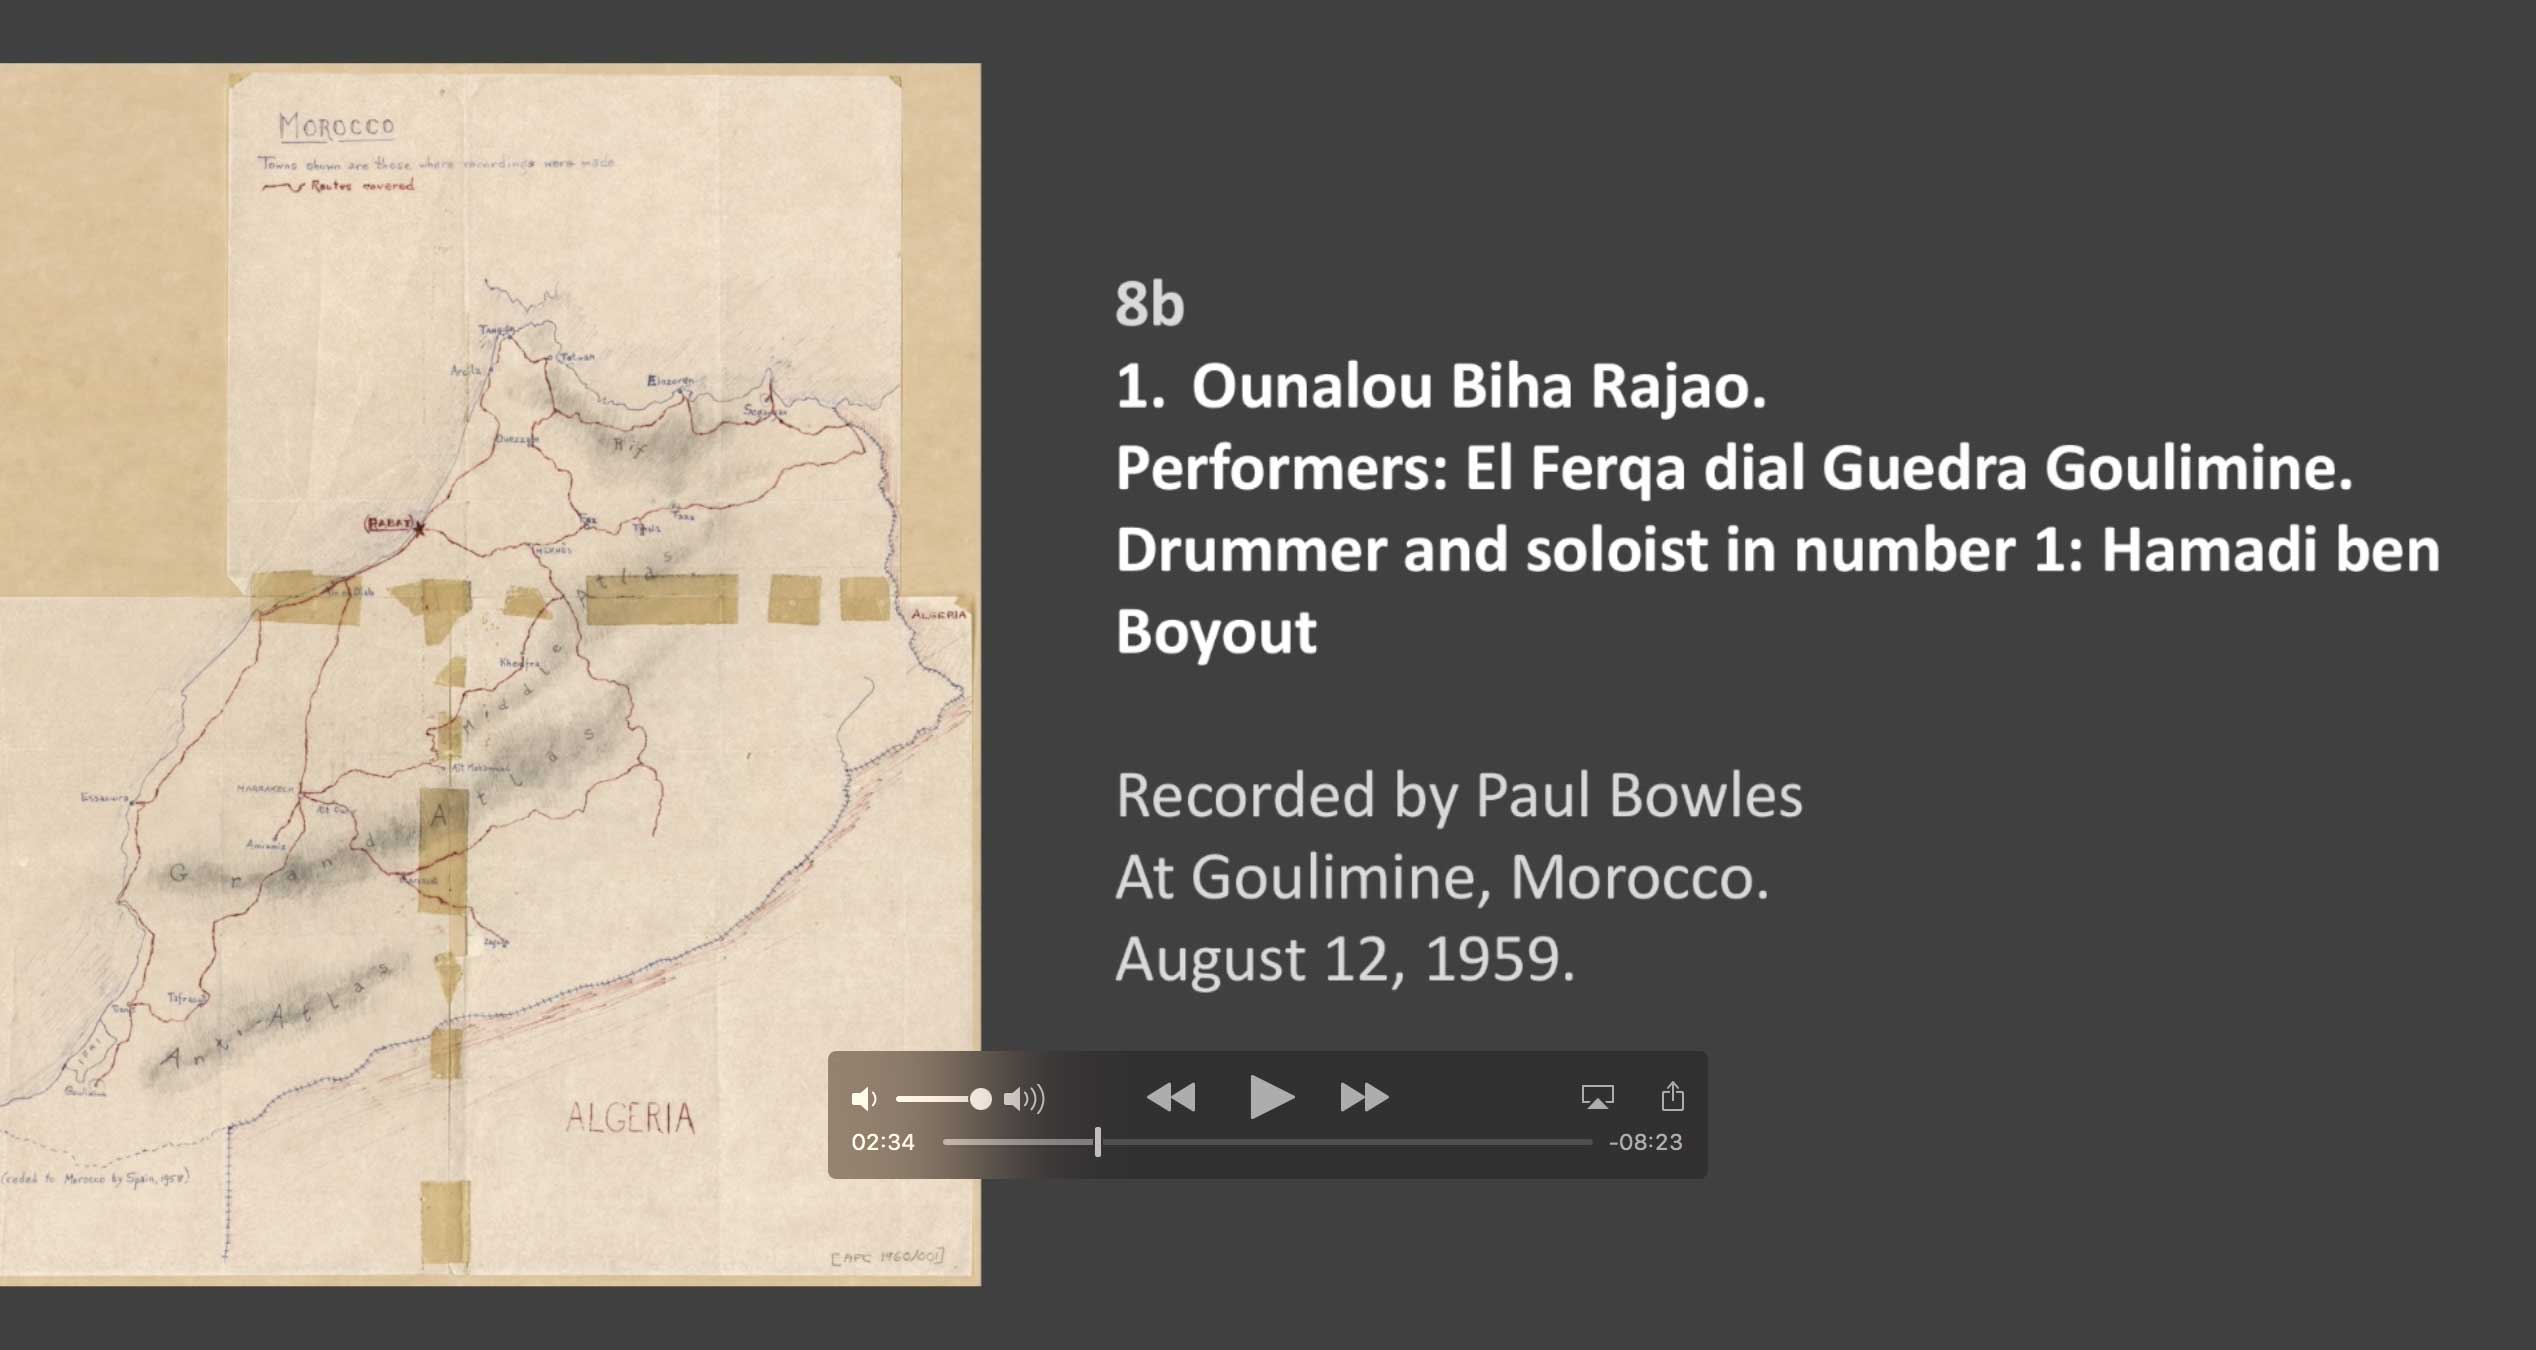 Hamadi Ben Boyout - 8B Track 1 Ounalou Biha Rajao.
Performers: El Ferqa dial Guedra Goulimine 
Drumming and solo singing are by Hamadi Ben Boyout.

Recorded by Paul Bowles at Goulimine, Moroccan Sahara.
August 12, 1959
